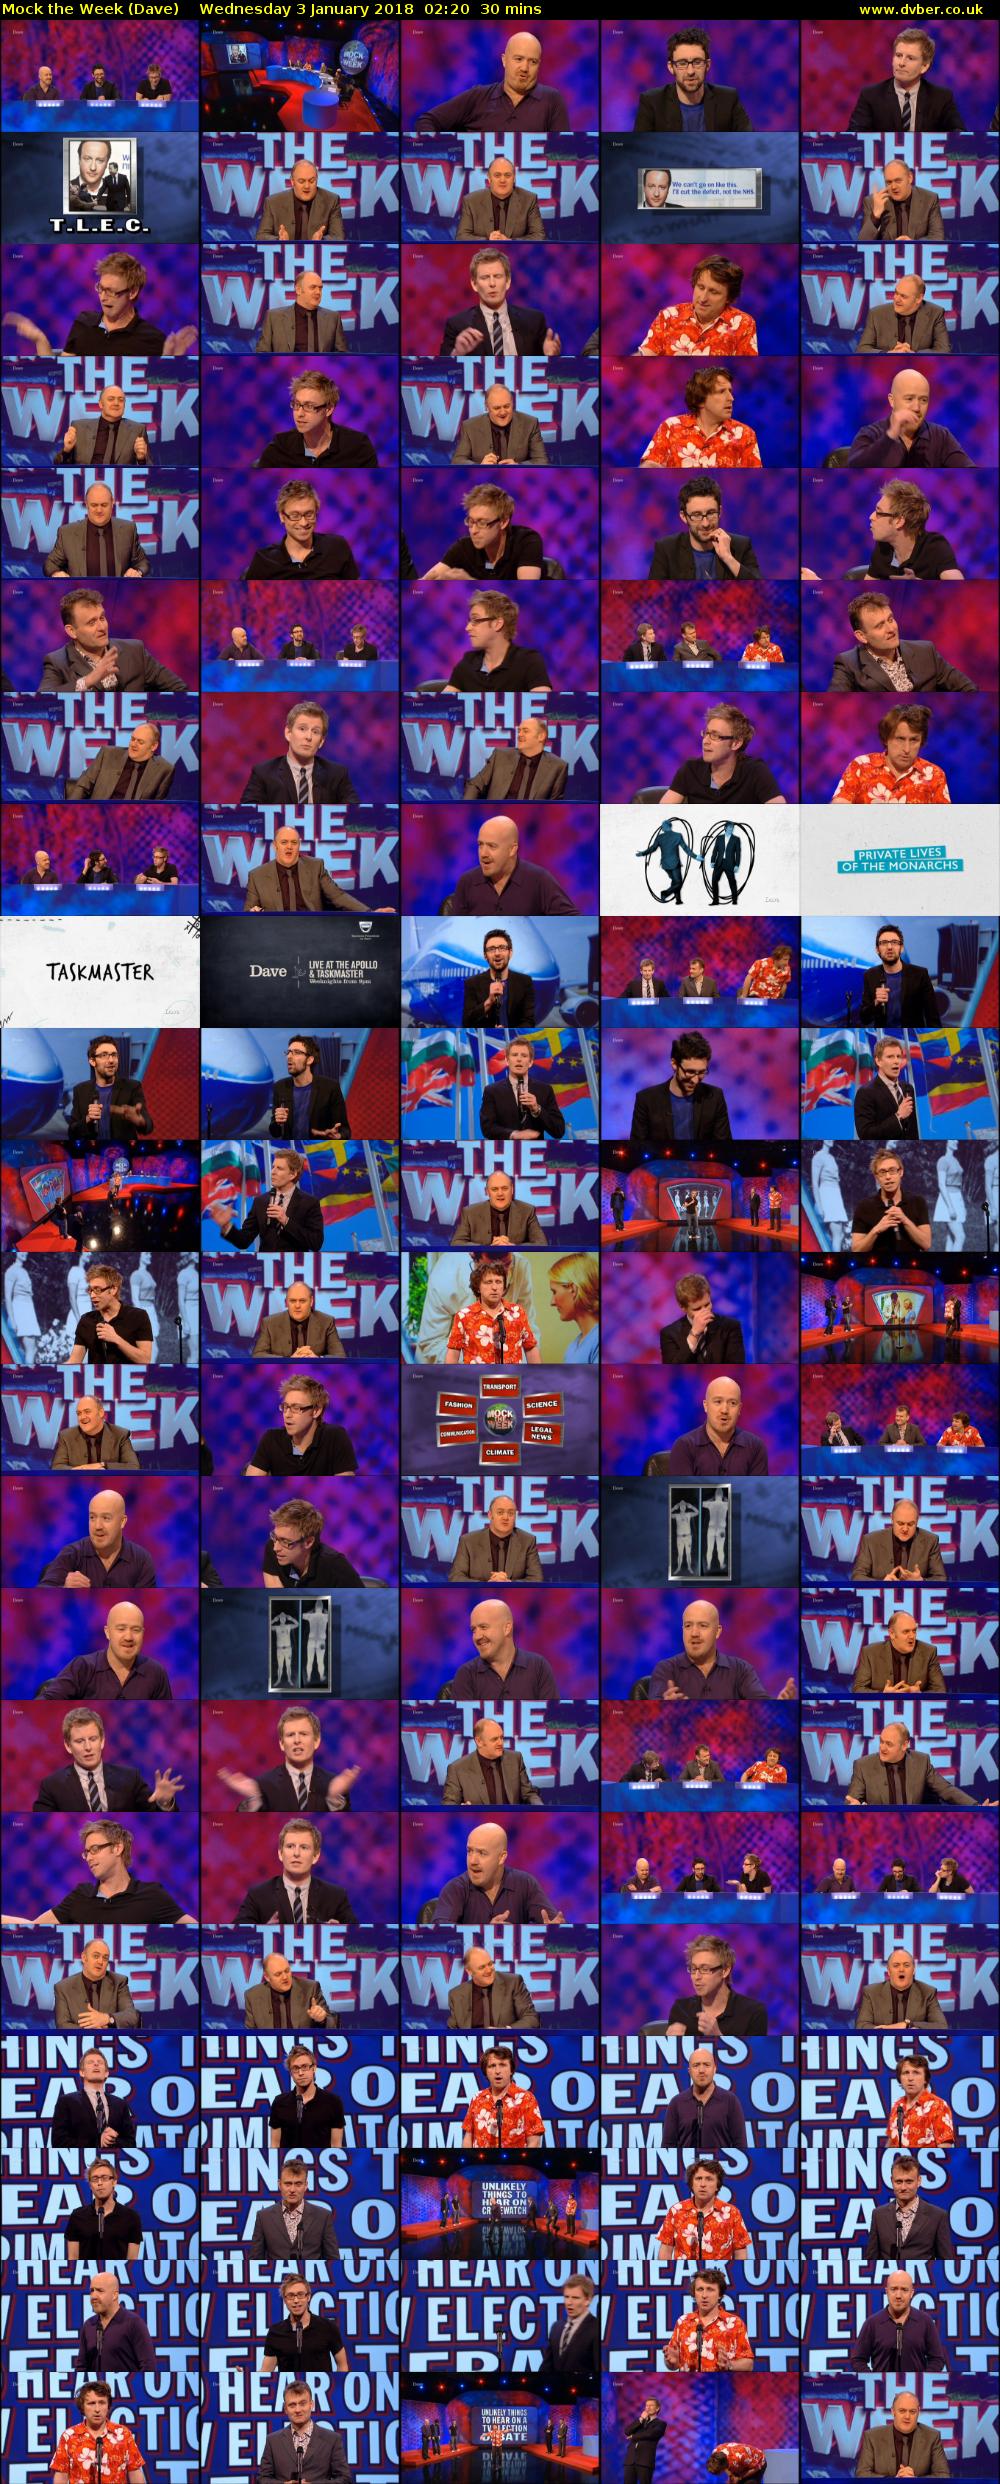 Mock the Week (Dave) Wednesday 3 January 2018 02:20 - 02:50